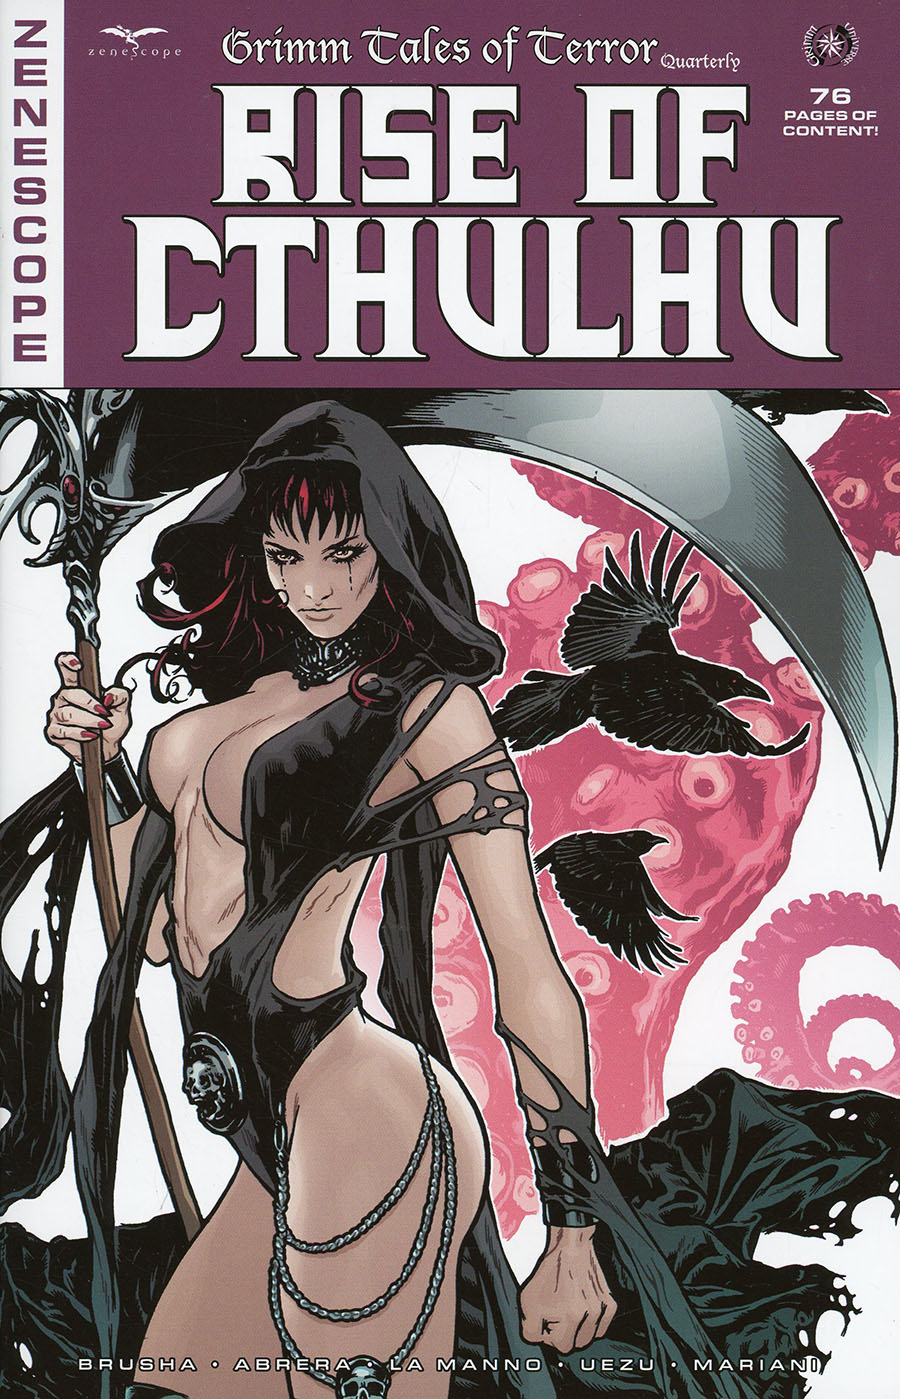 Grimm Fairy Tales Presents Grimm Tales Of Terror Quarterly #7 Rise Of Cthulhu Cover A Jeff Spokes